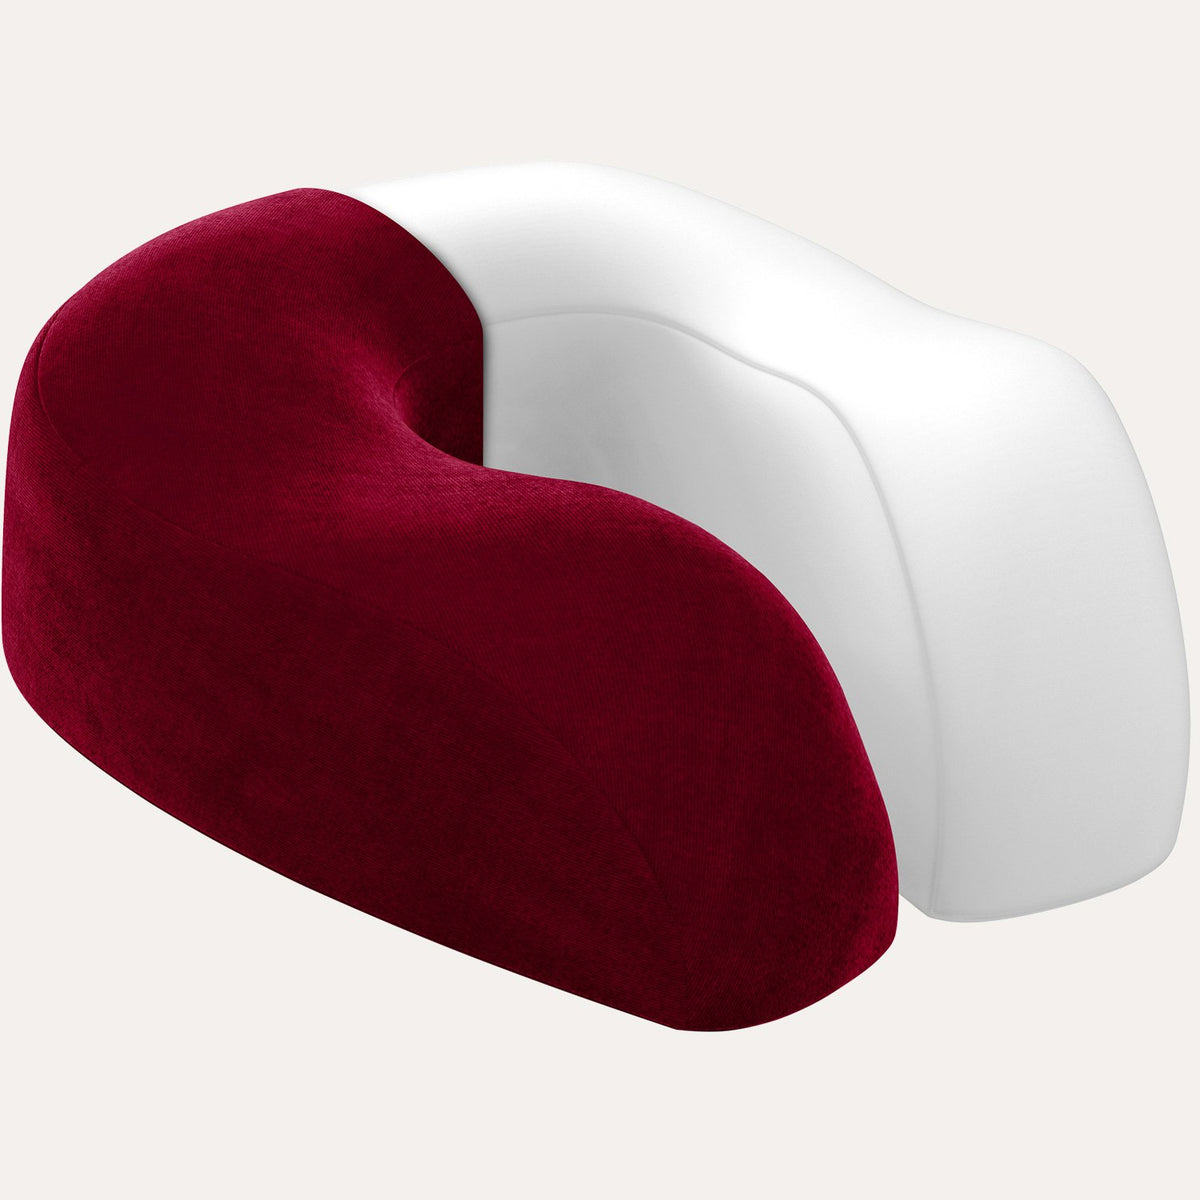 Noarlalf Seat Cushion Travel Neck Pillow Memory Foam Airplane Travel  Comfortable Washable Cover Plane Neck Support Pillow for Neck Sleeping Chair  Cushions 28*24*8 